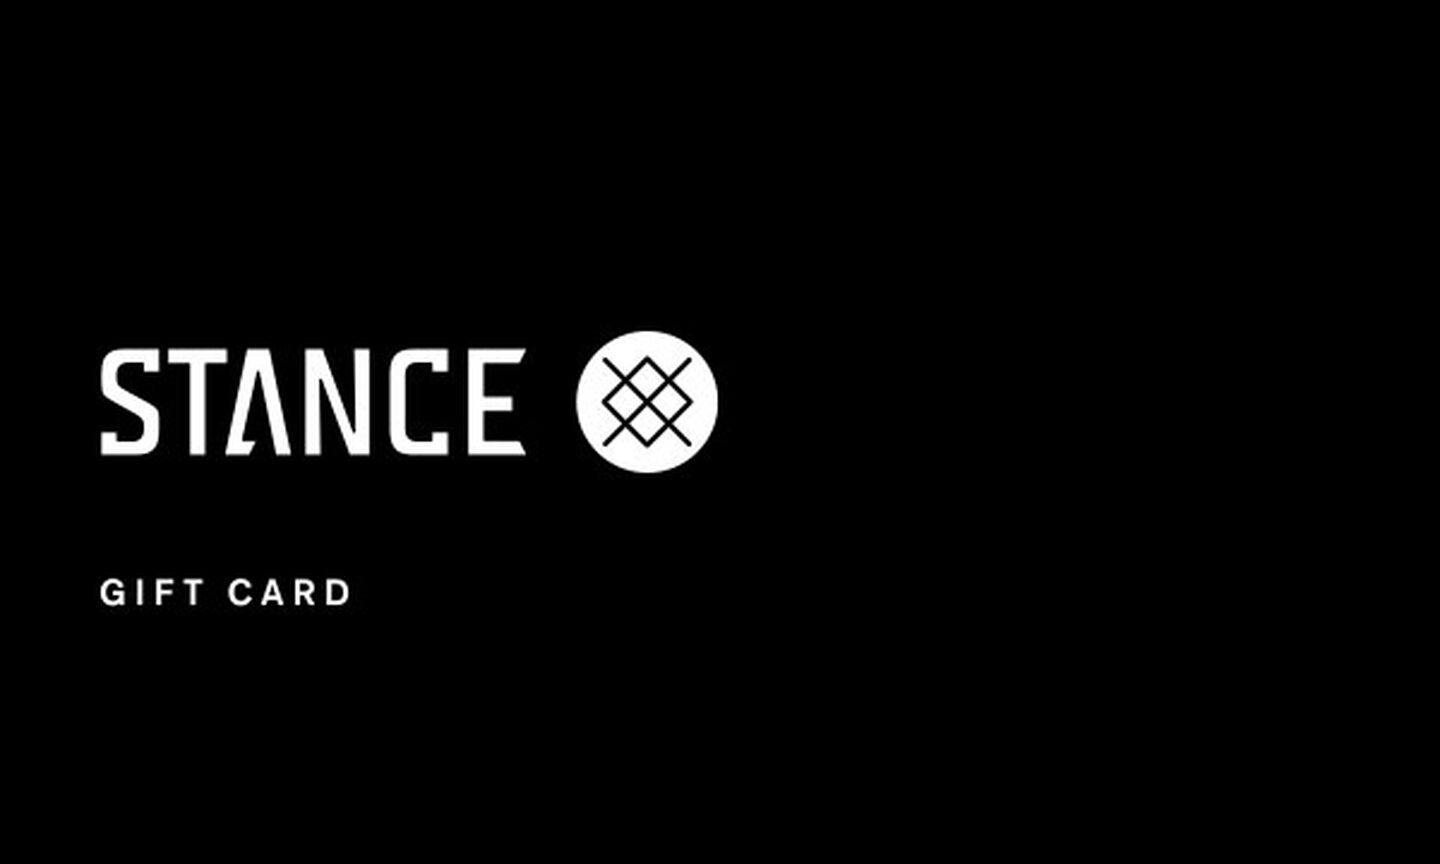 Black image with an overlay that reads "Stance Gift Card"